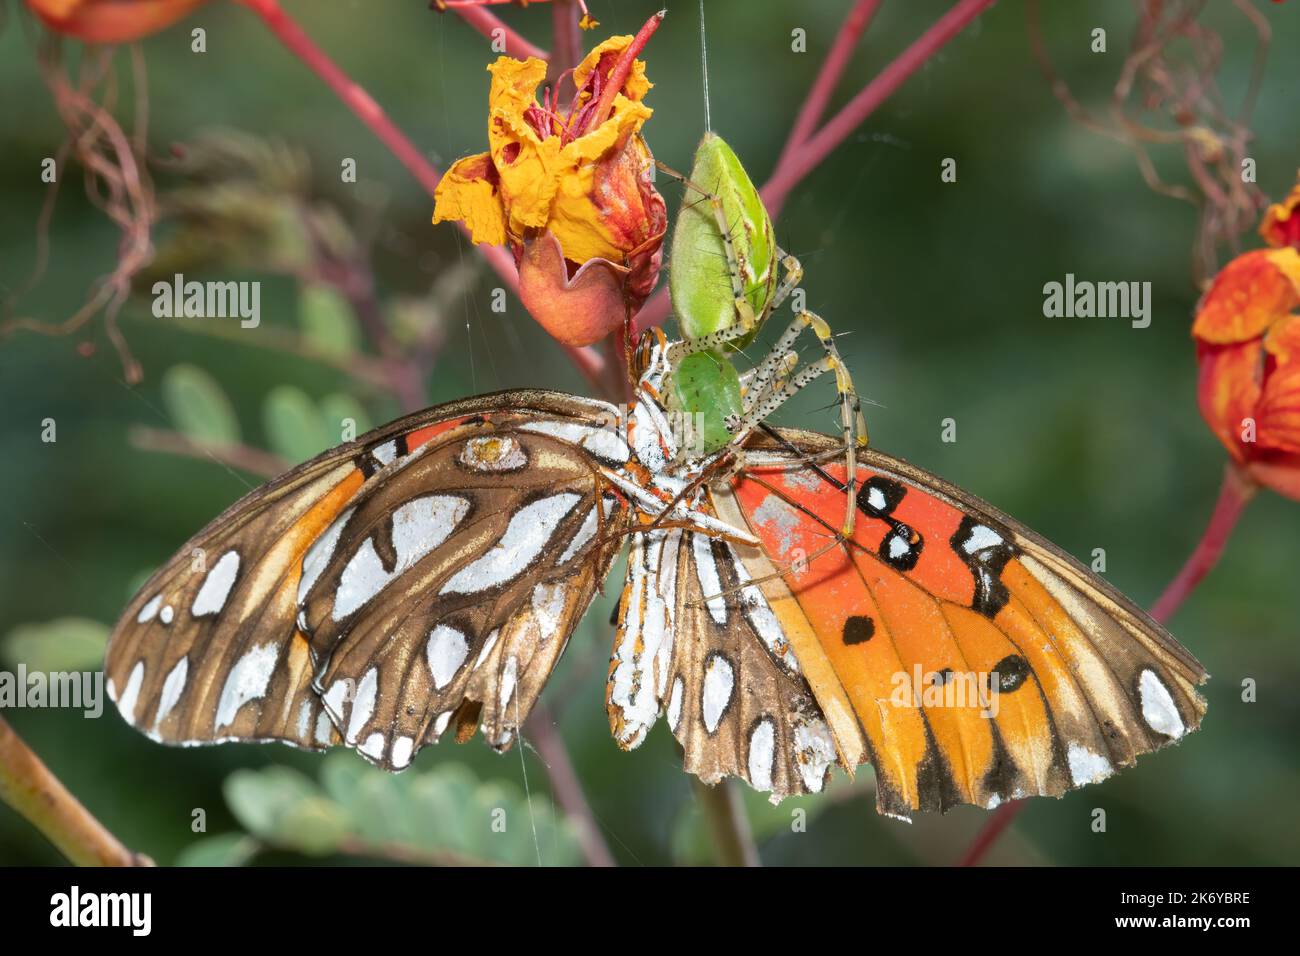 A green lynx spider makes a meal out of a gulf fritillary butterfly on a red bird of paradise plant at Mitchell Lake, San Antonio, Texas. Stock Photo